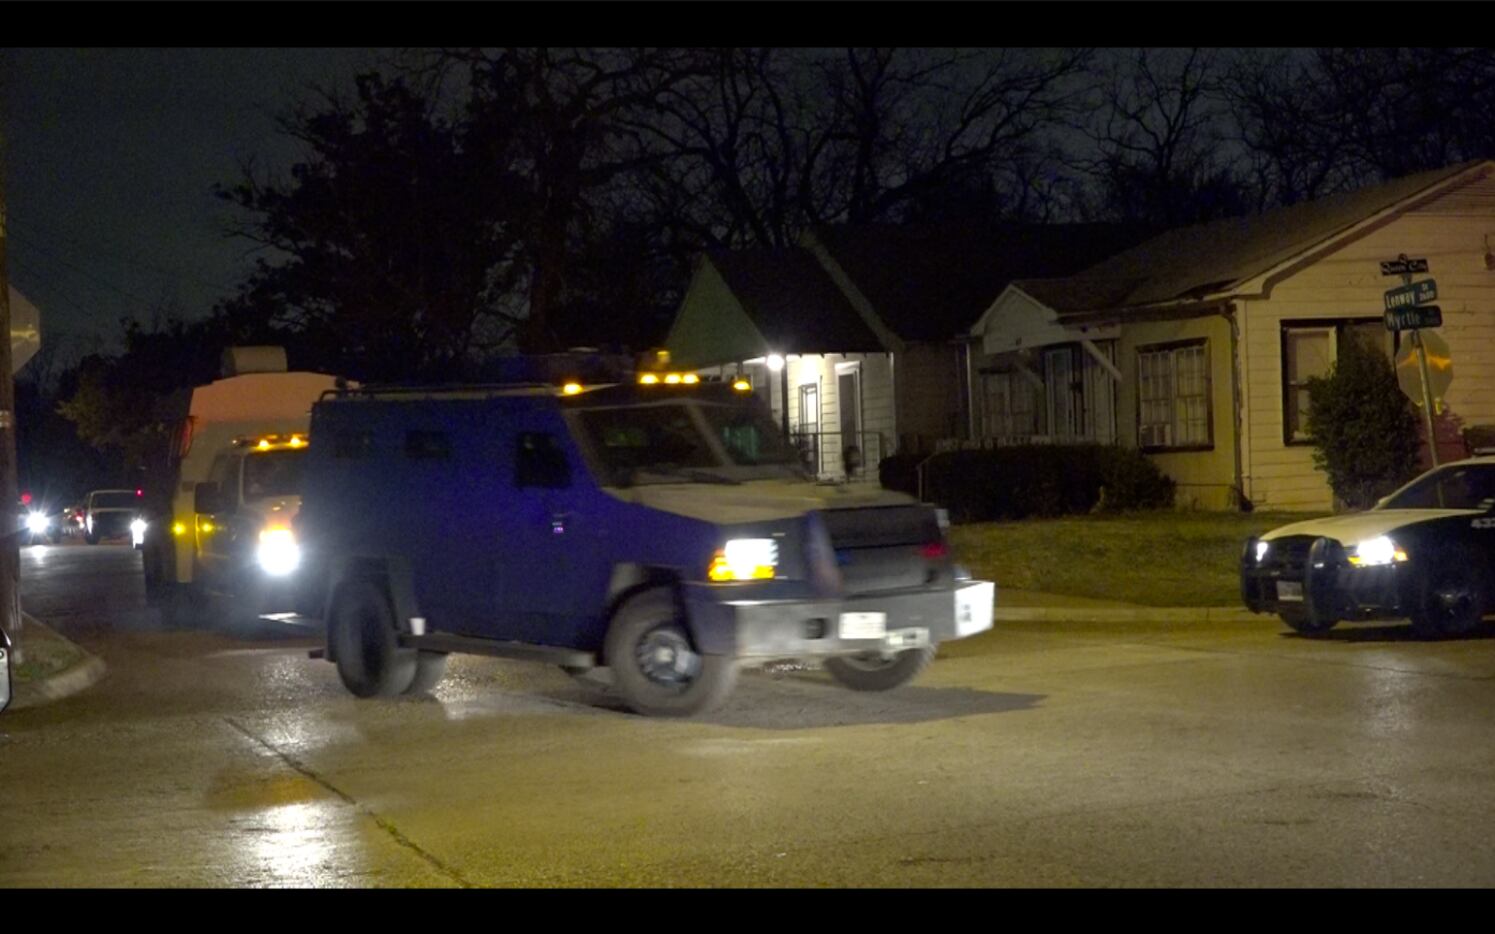 SWAT leaving the scene of the standoff.